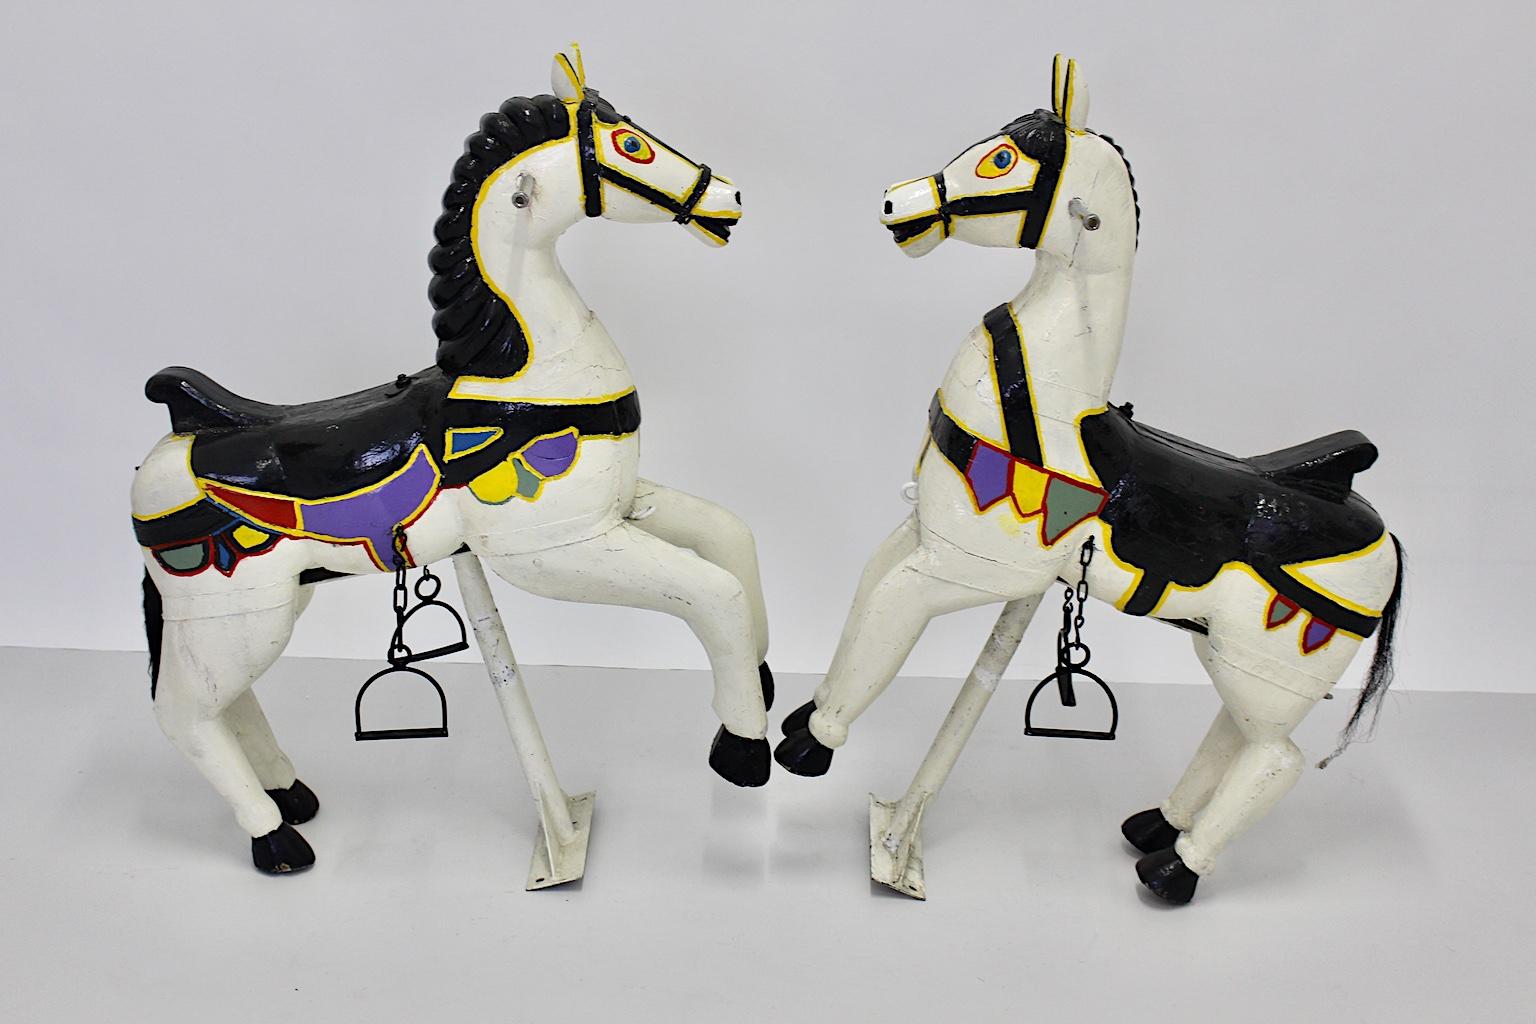 Antique vintage pair of carousel horses from multicolored lacquered wood Austria circa 1890.
The carousel horses feature a carved wooden white lacquered body with white lacquered iron and sheet metal details.
The horses are very similar but show